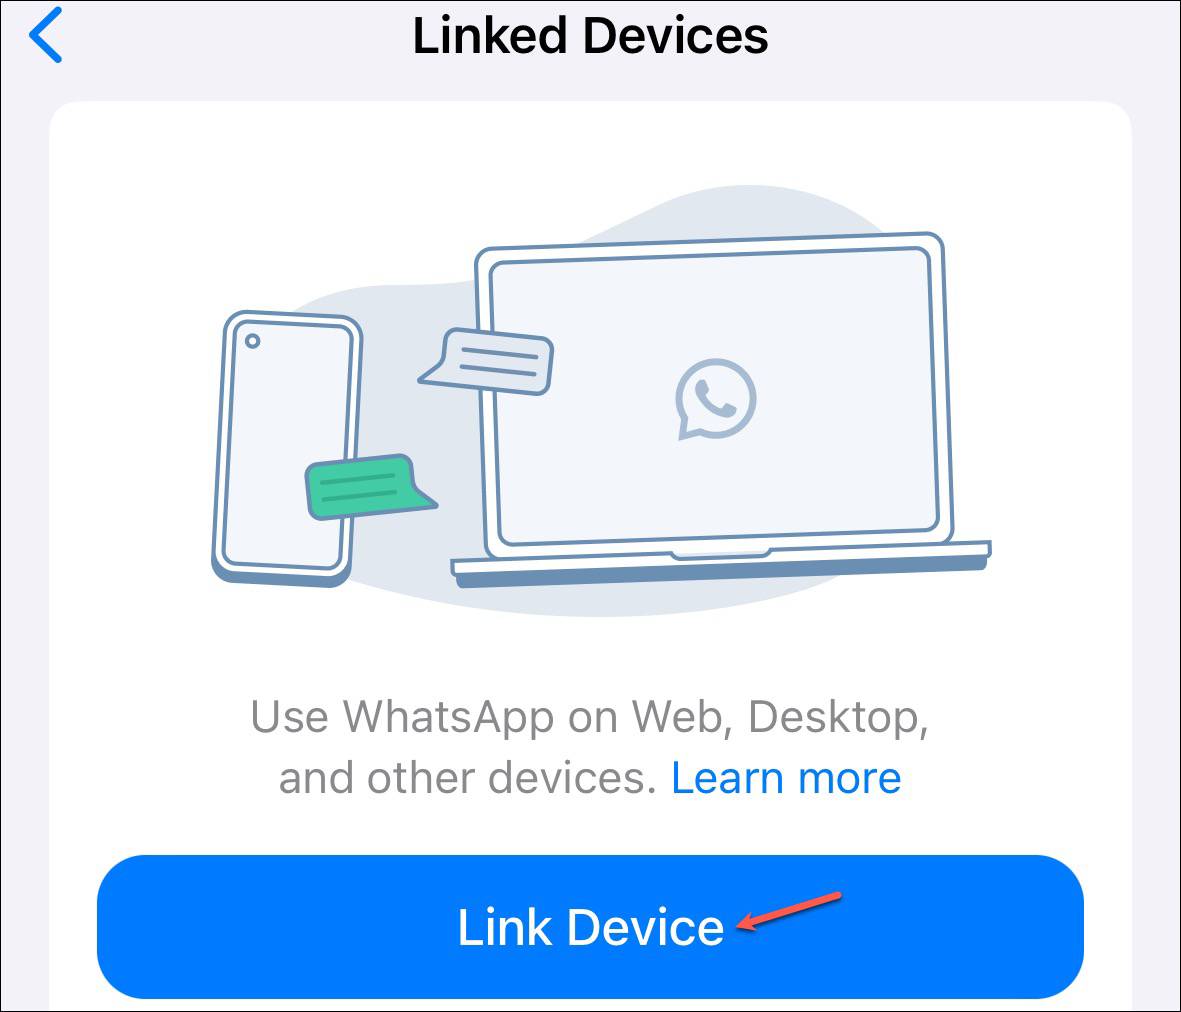 Link Device - Whatsapp mobile